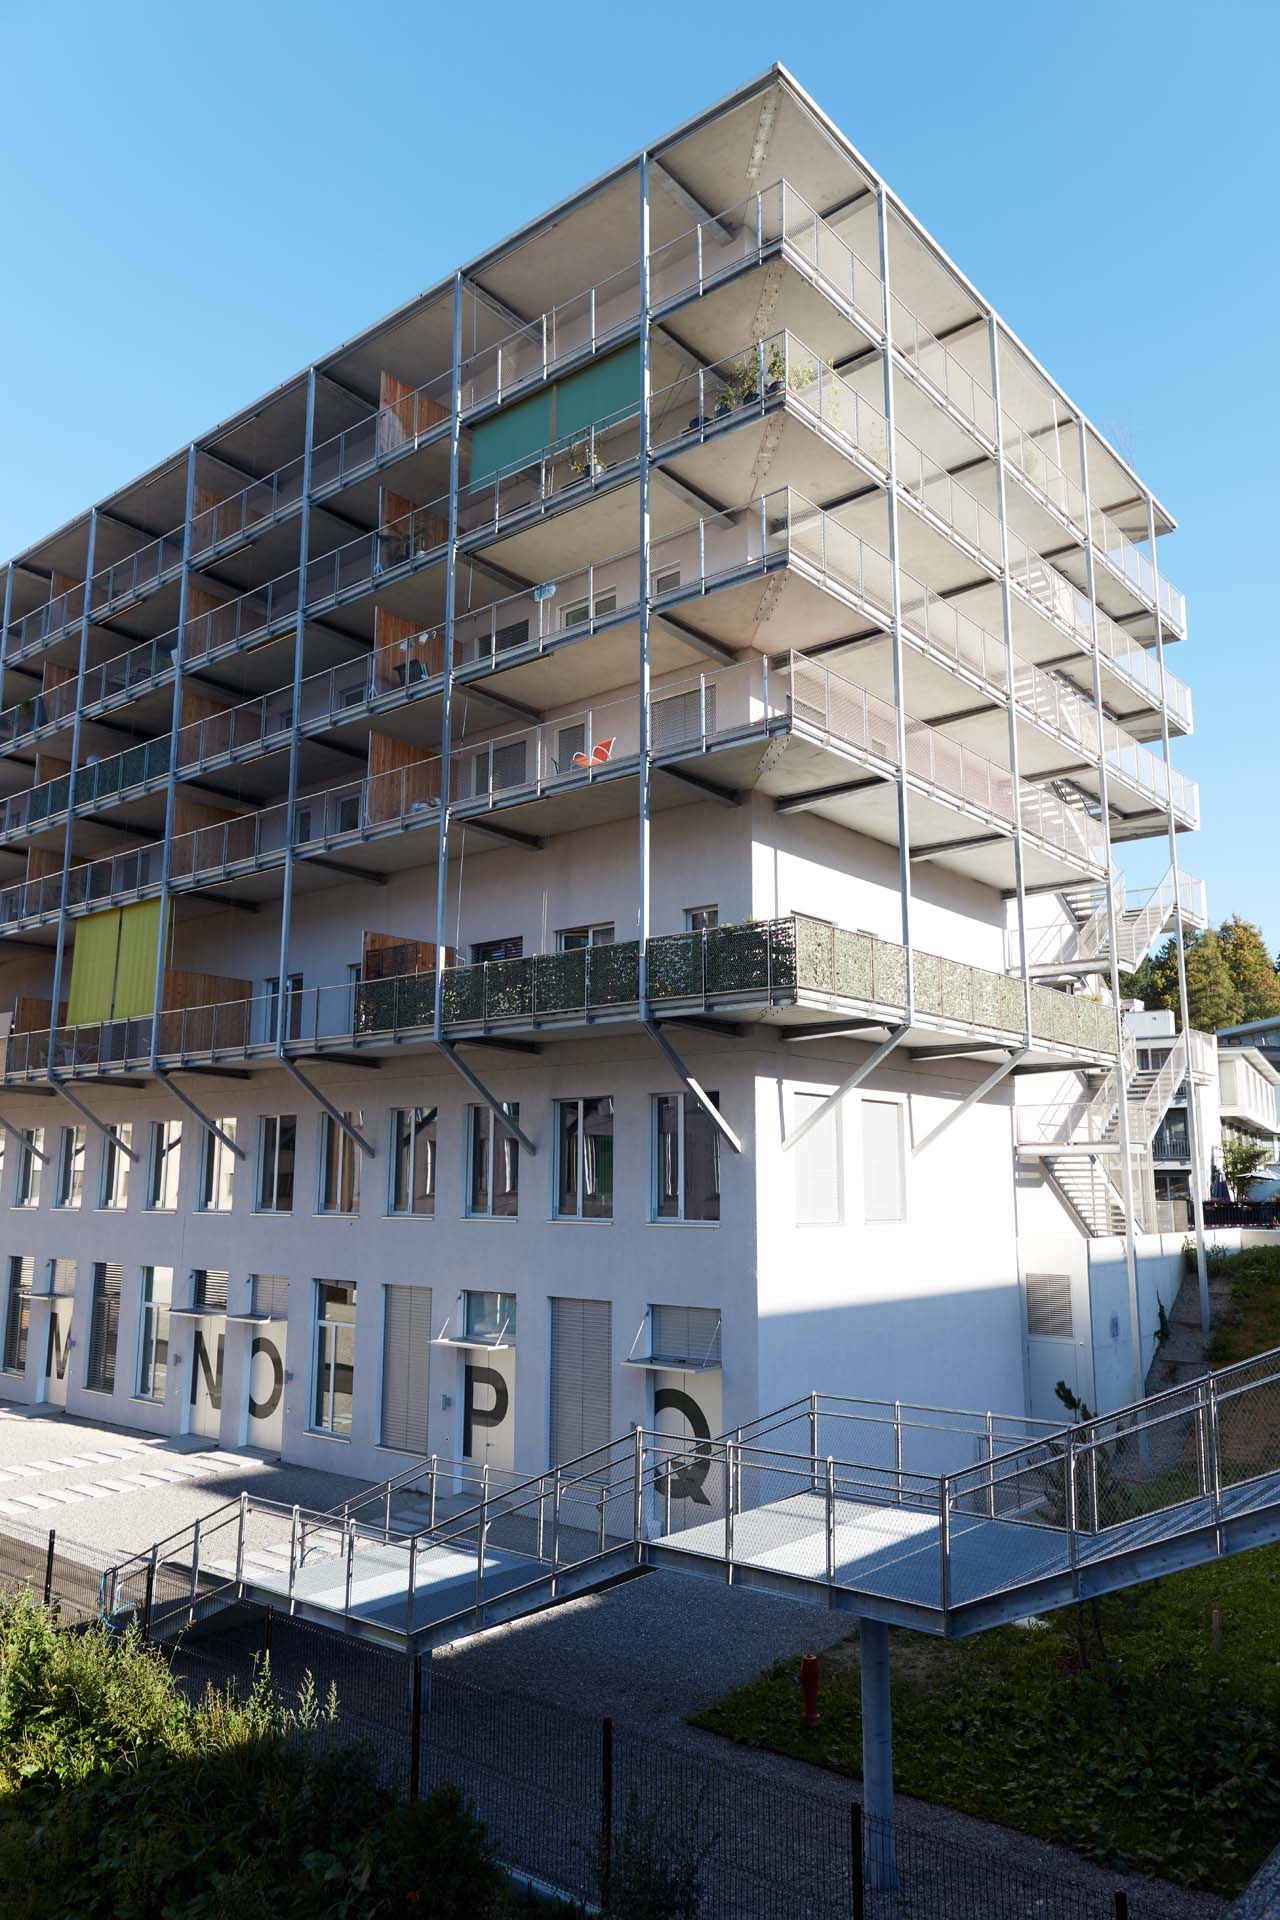 Apartment block in Fribourg, secured with webnet